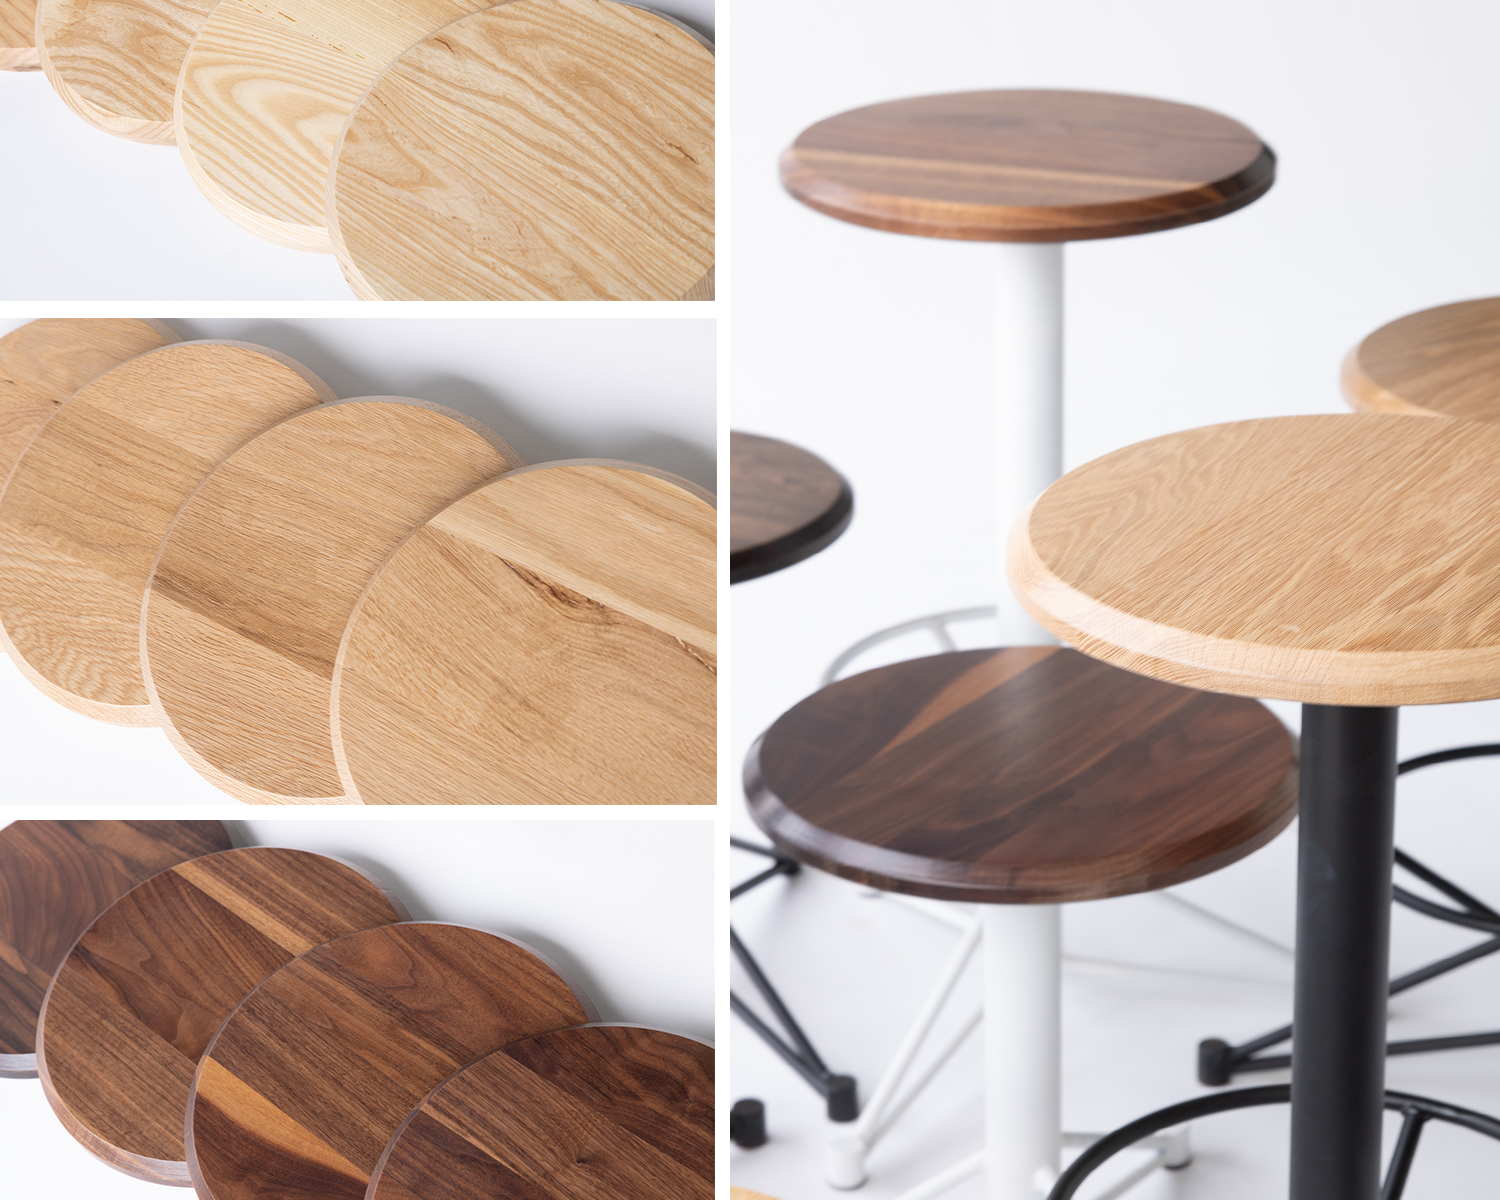 The Mast Stool - Handcrafted Stool Seating by Edgework Creative